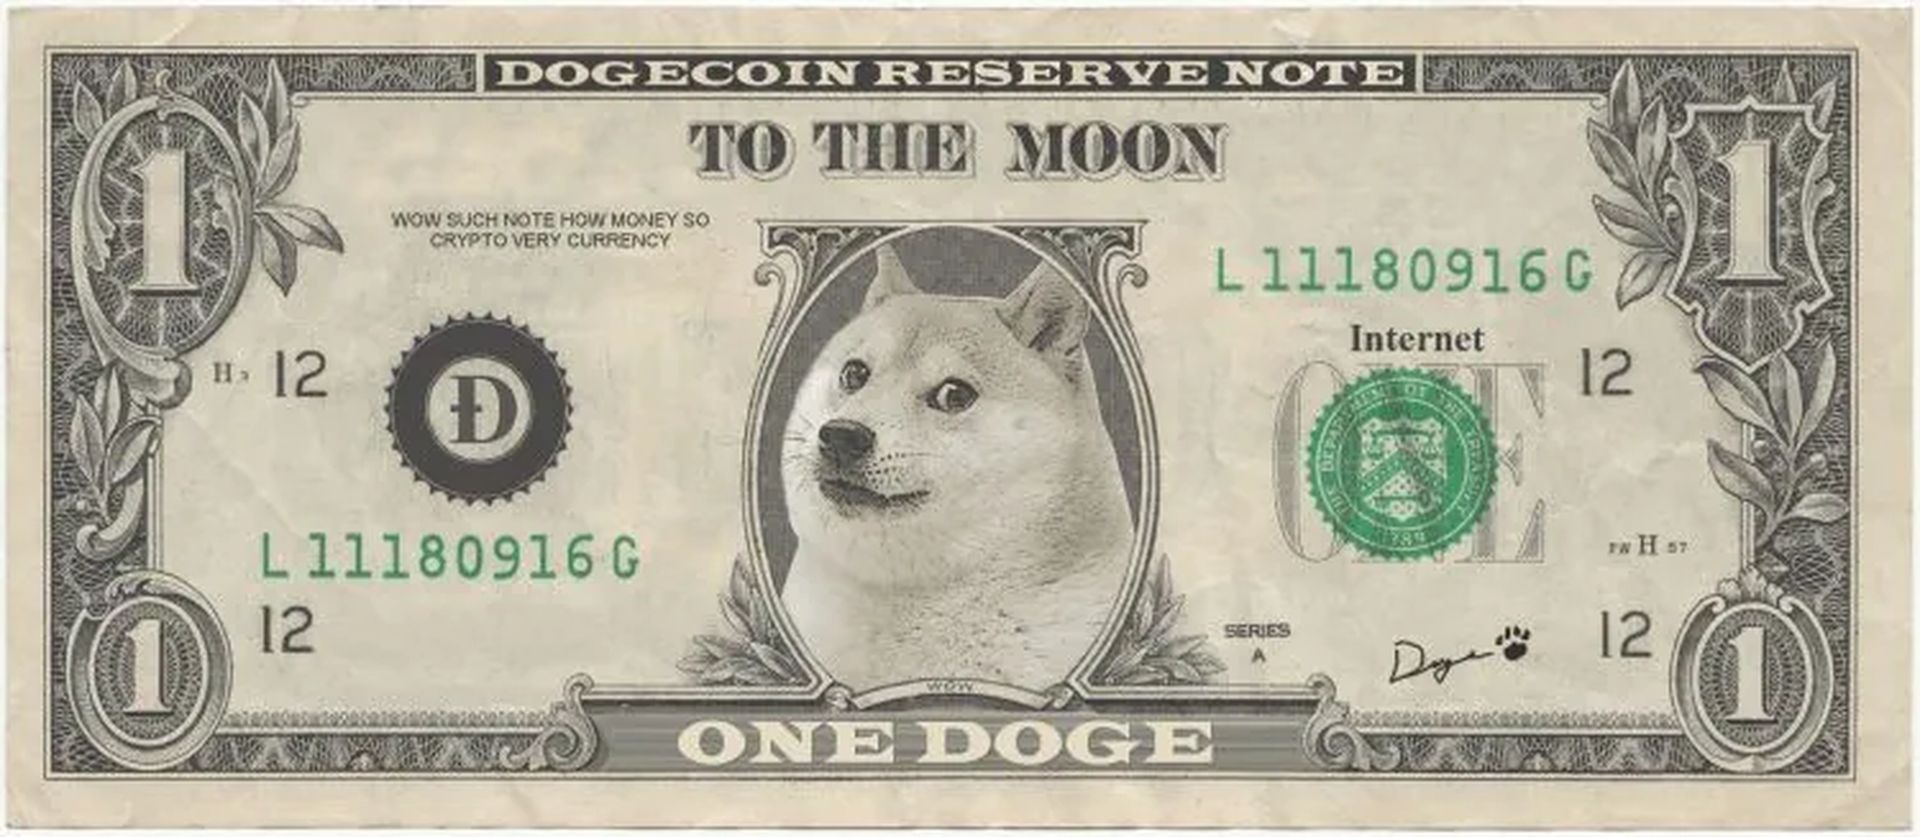 Even after the fact Elon Musk sued over claims of dogecoin pyramid scheme, he says that 